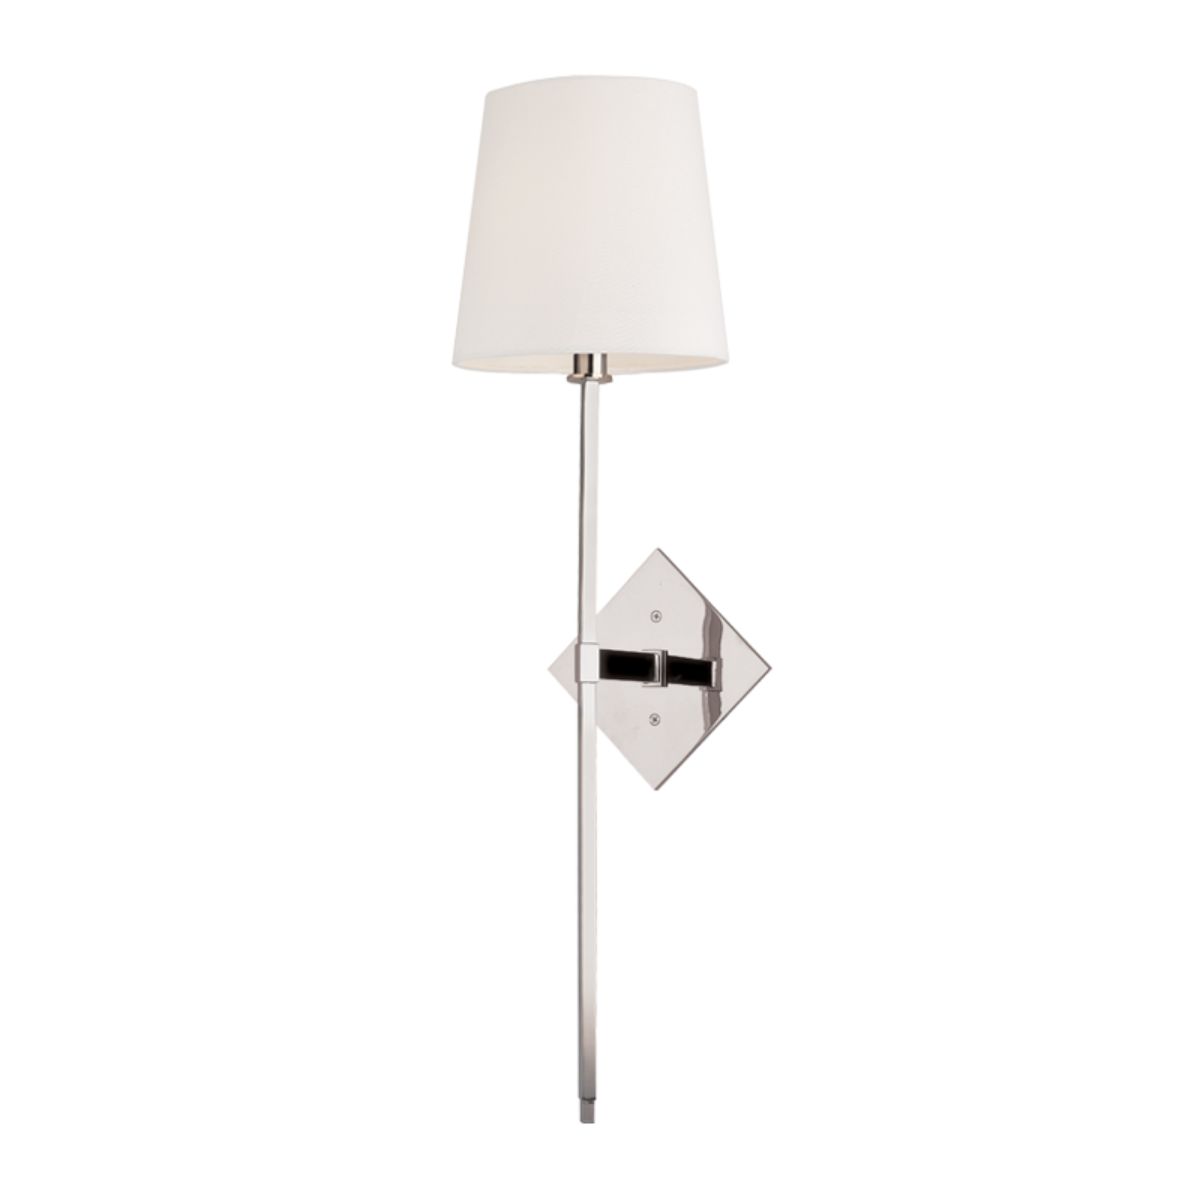 Cortland 26 in. Armed Sconce